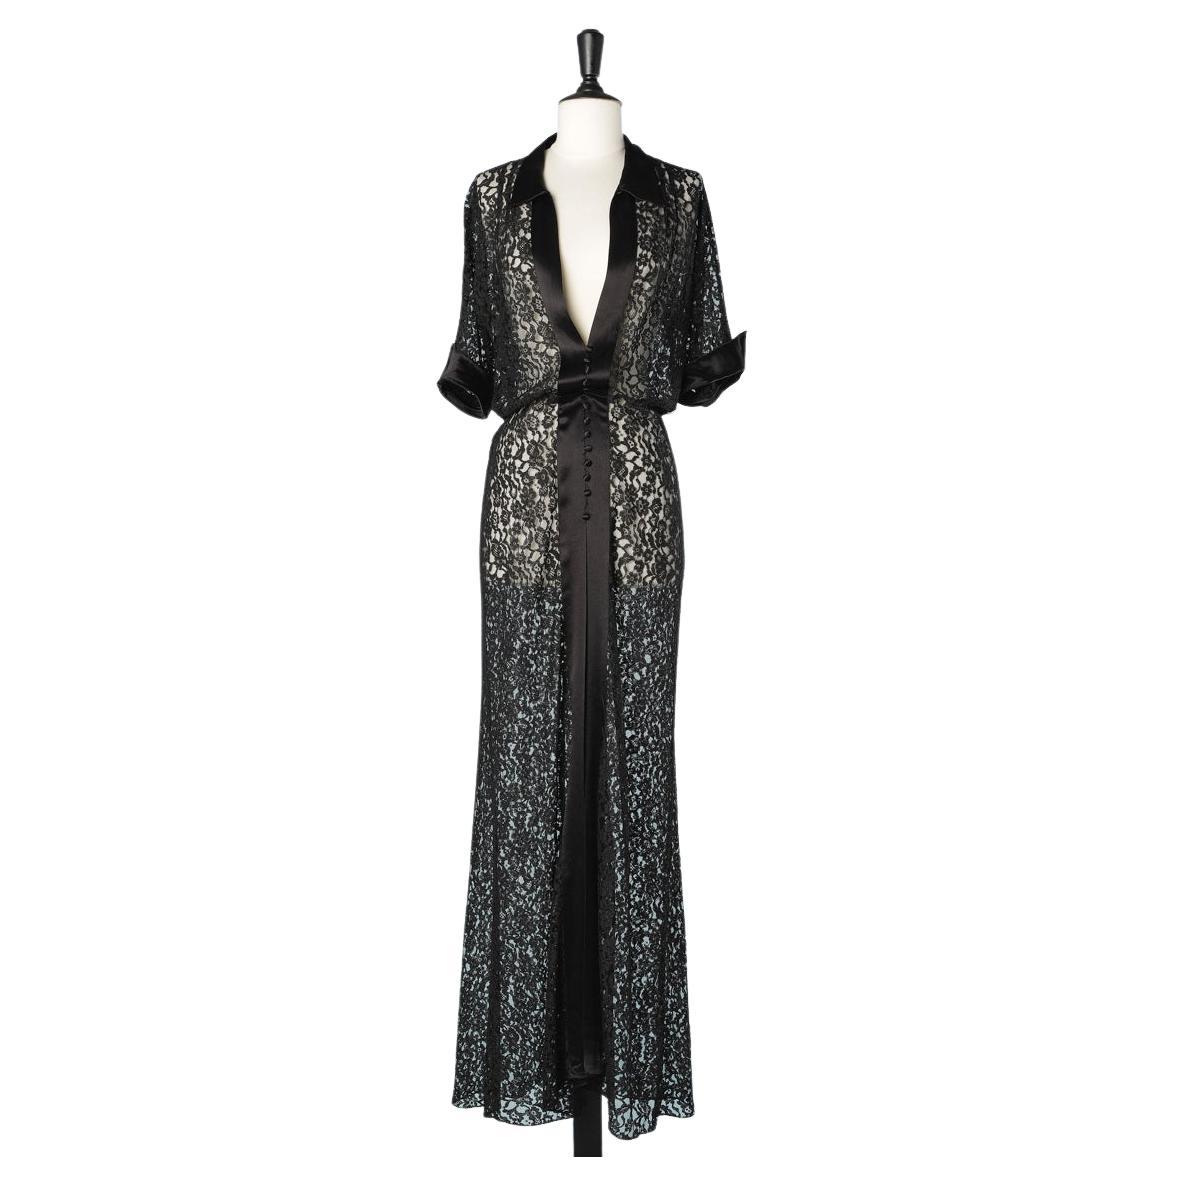 Evening coat in black lace with black silk satin edge and collar Circa ...